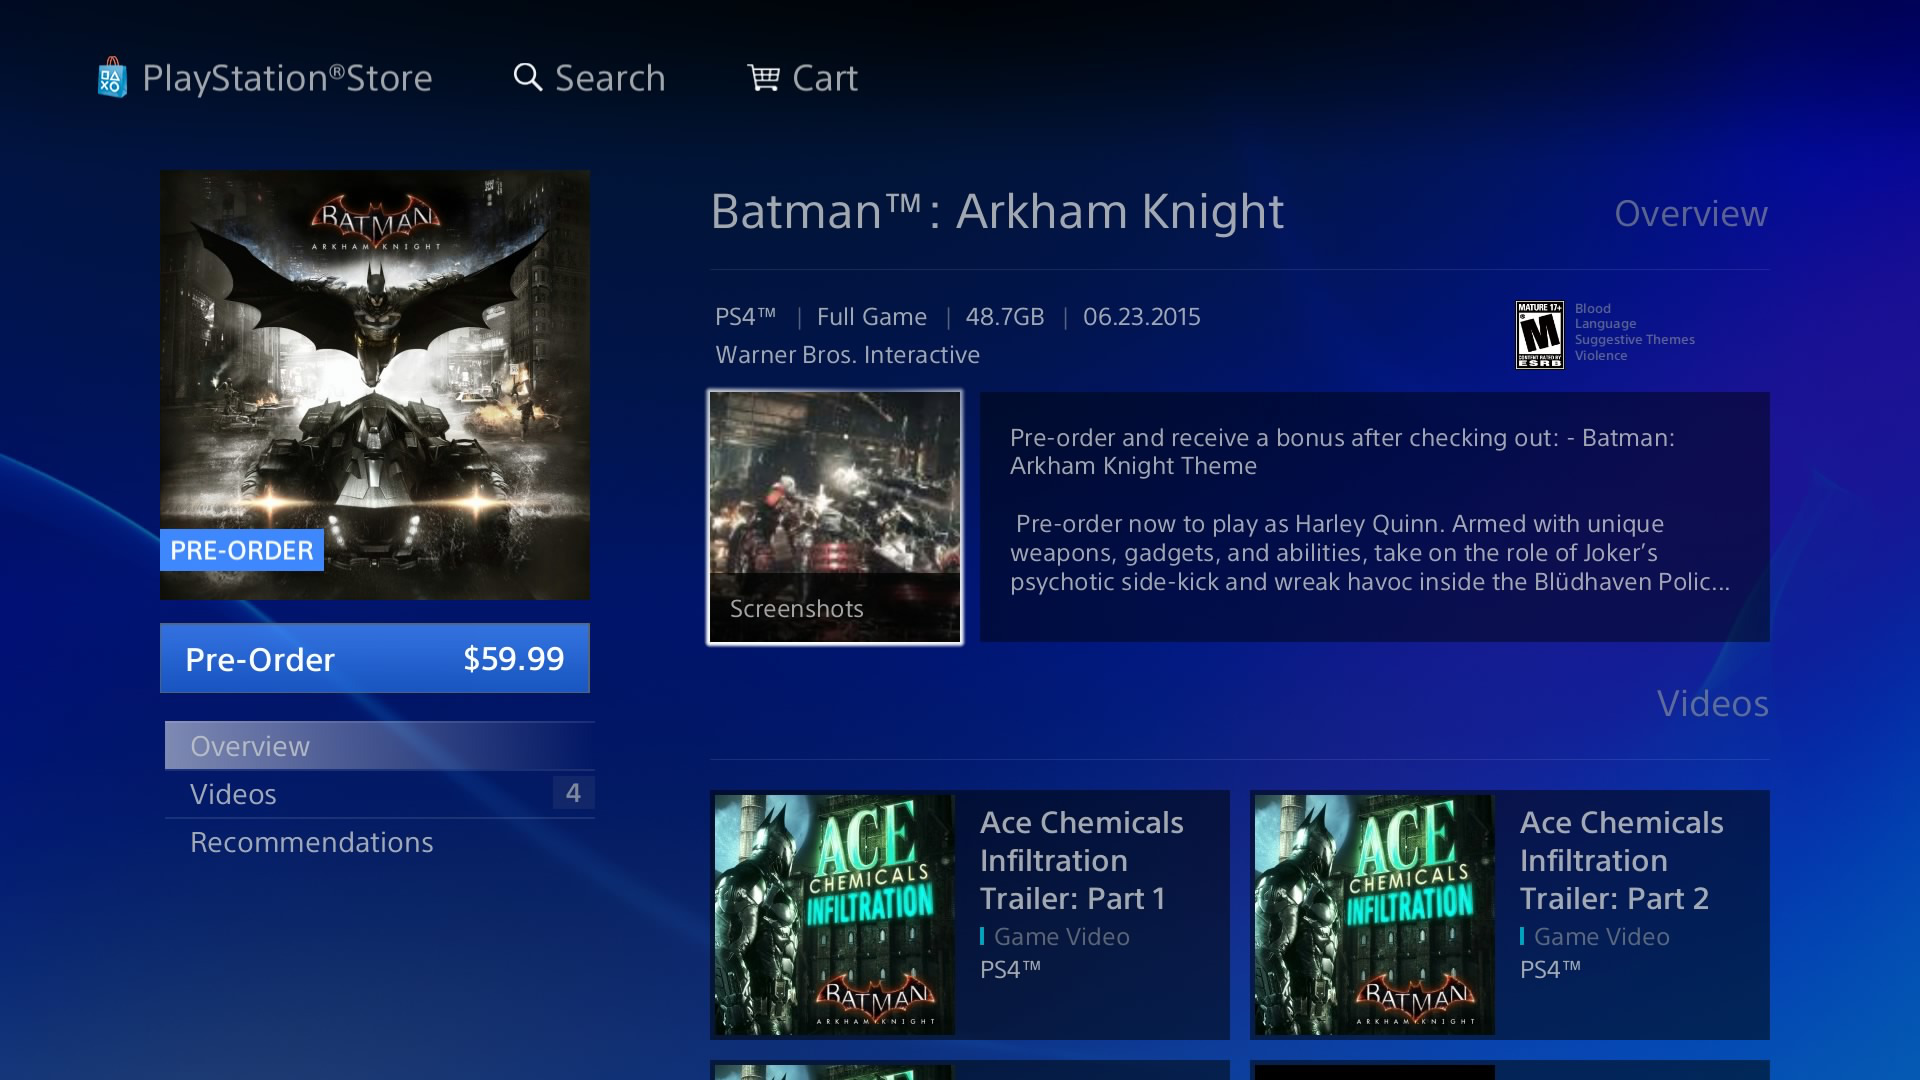 Batman Arkham Knight PS4 File Size For Download Revealed, Bigger Than GTA 5